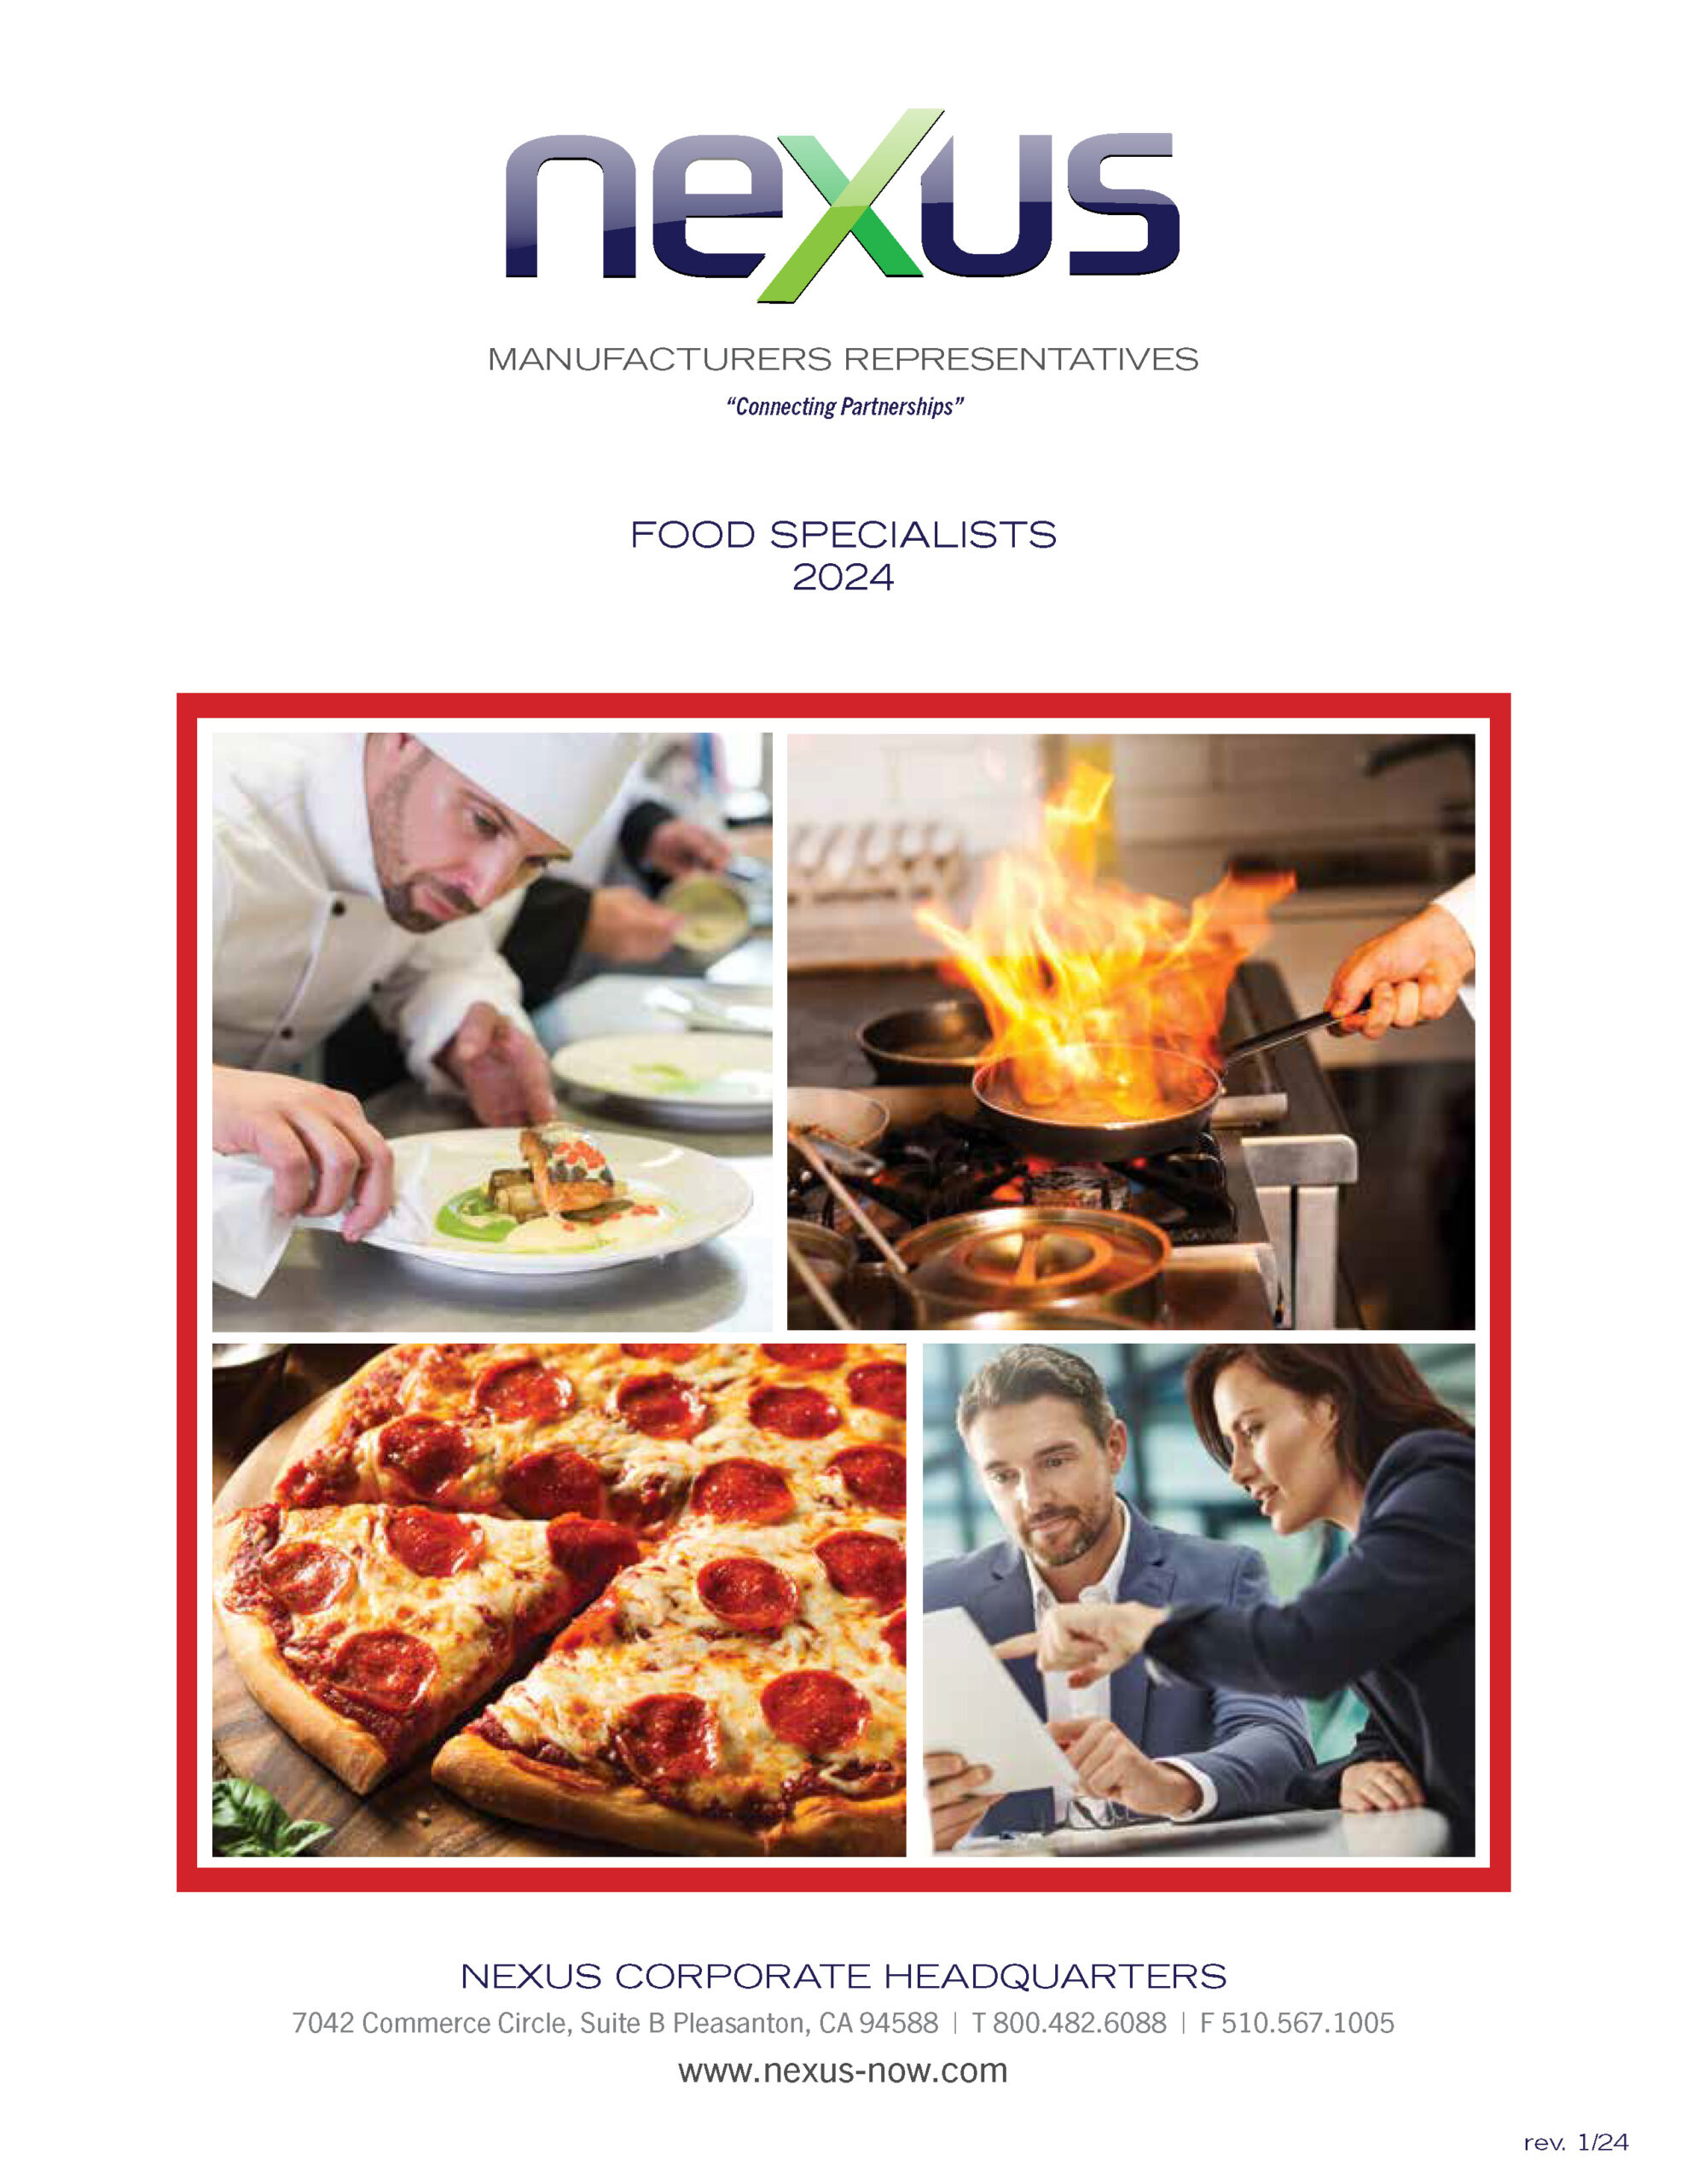 A promotional brochure for a food specialists company, showcasing chefs cooking and a pizza, with contact information at the bottom.